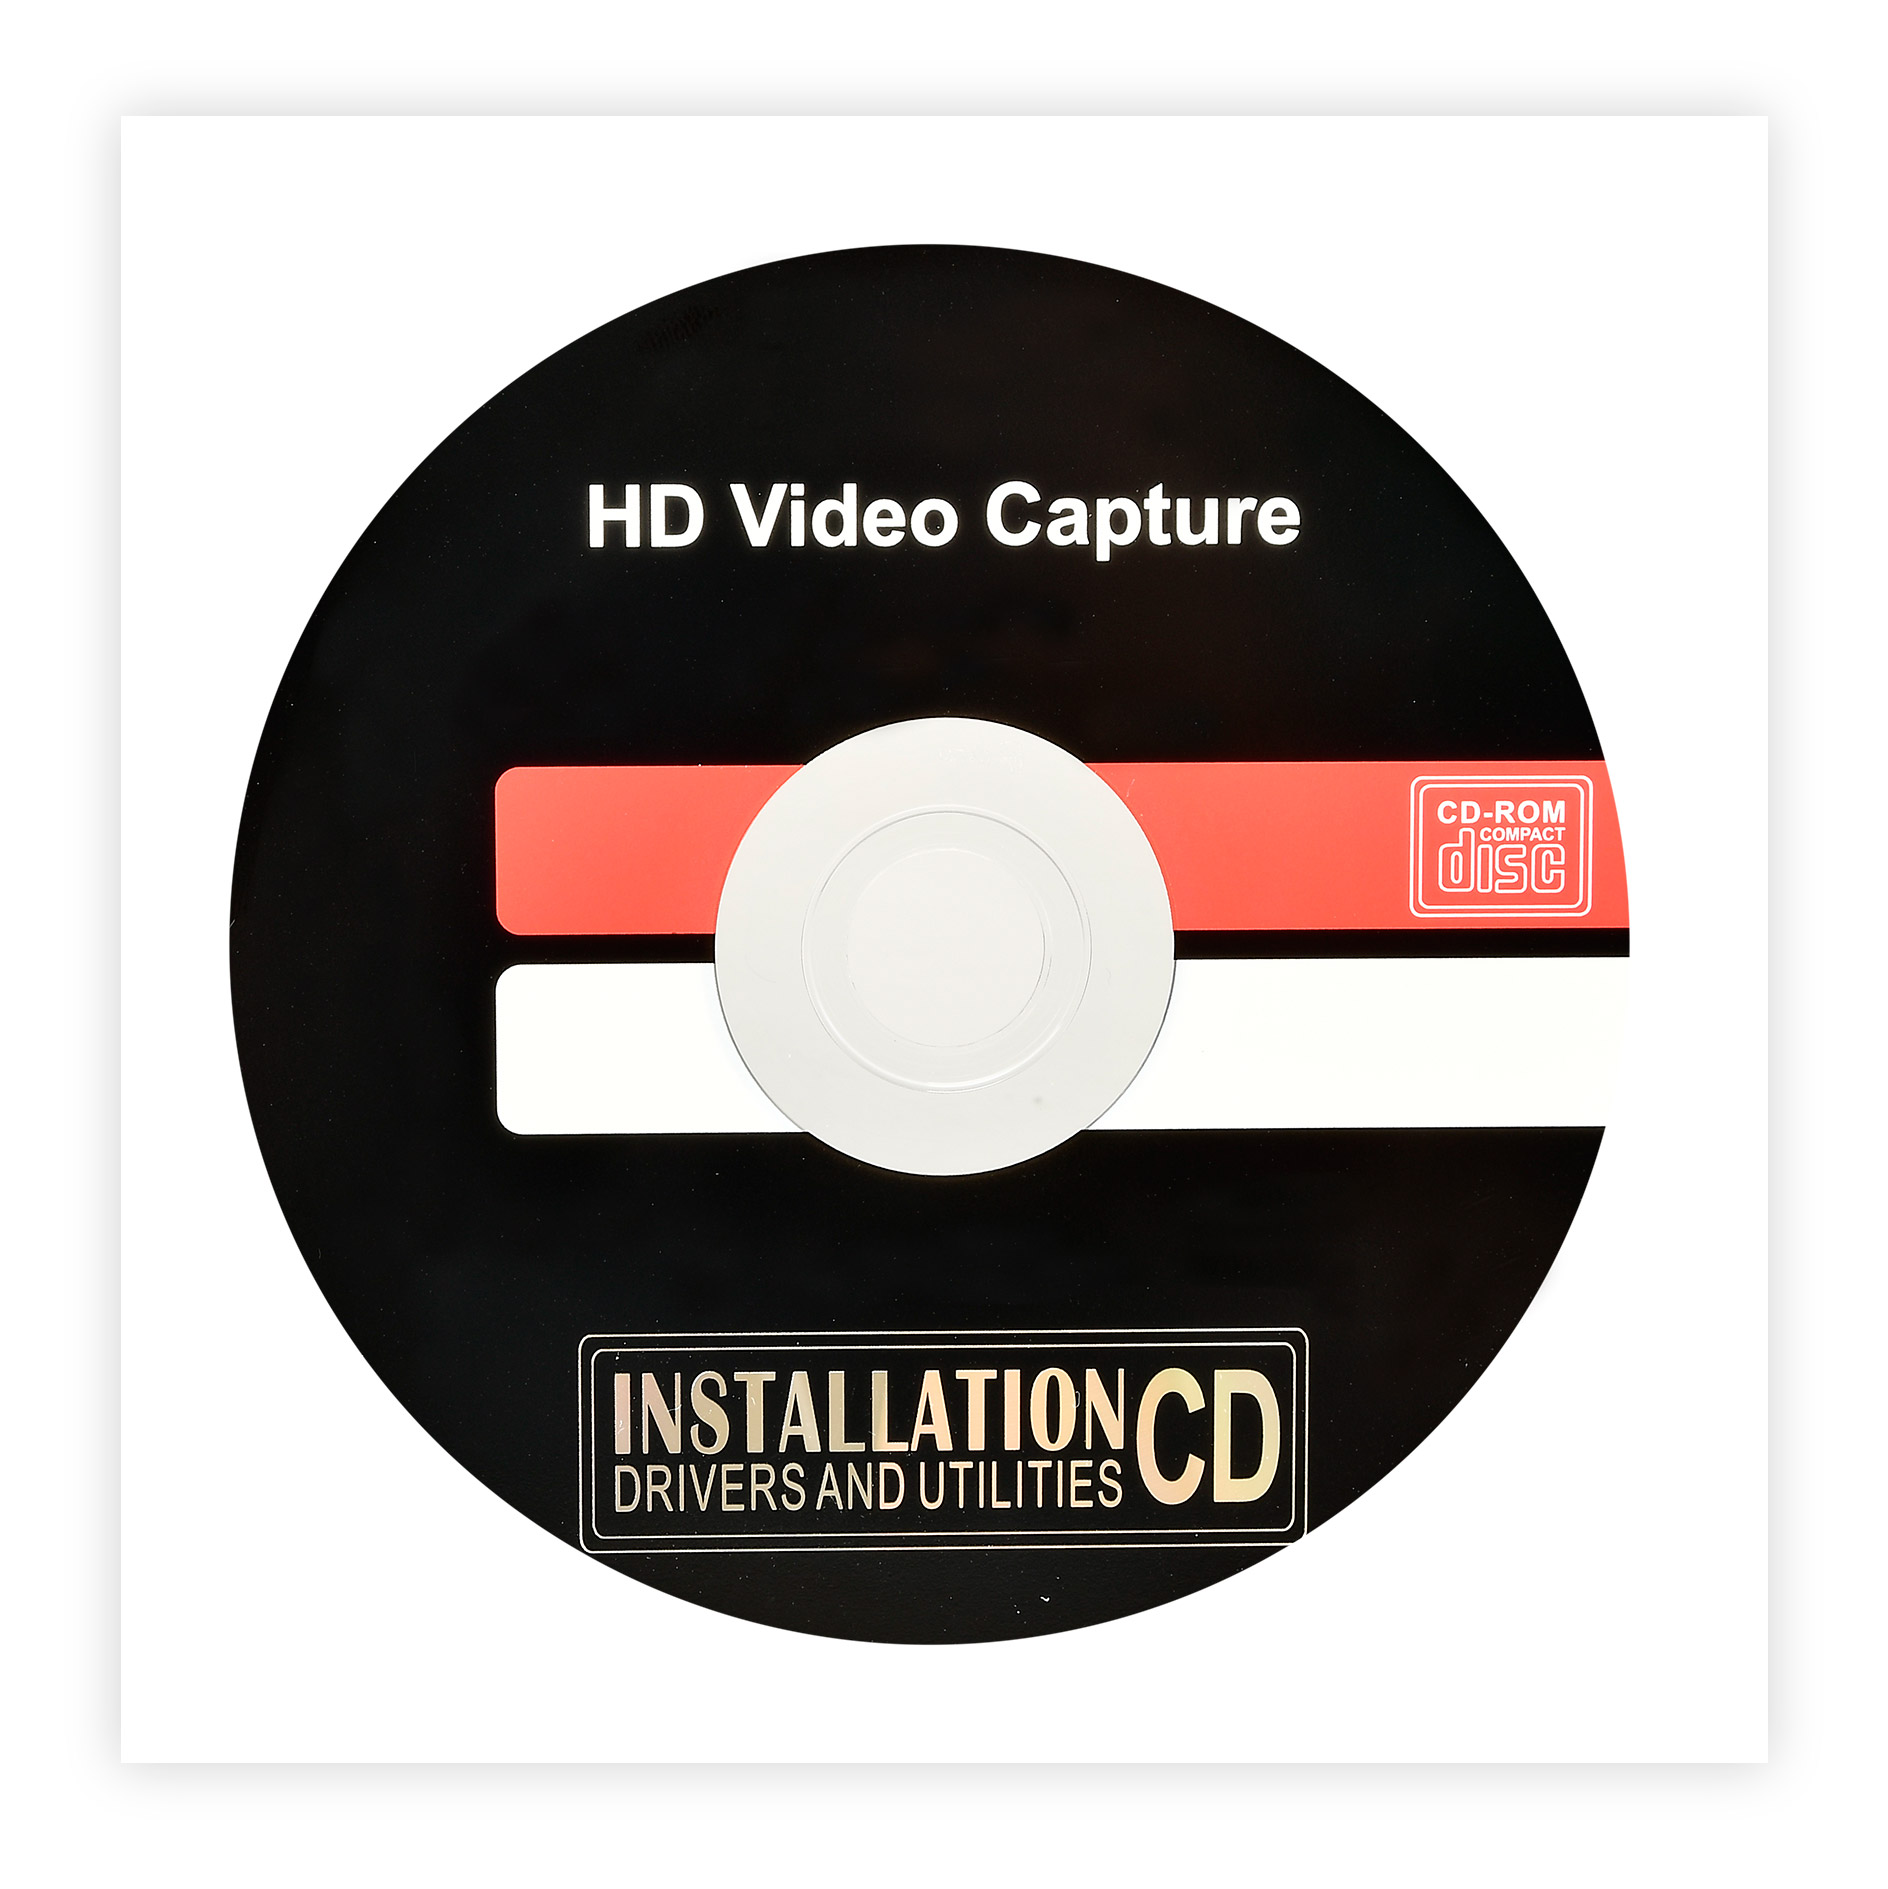 DIGITNOW Video To Digital Converter,Vhs to Digital Converter To Capture Video From VCR's,VHS Tapes,Hi8,Camcorder,DVD, TV BOX and Gaming Systems